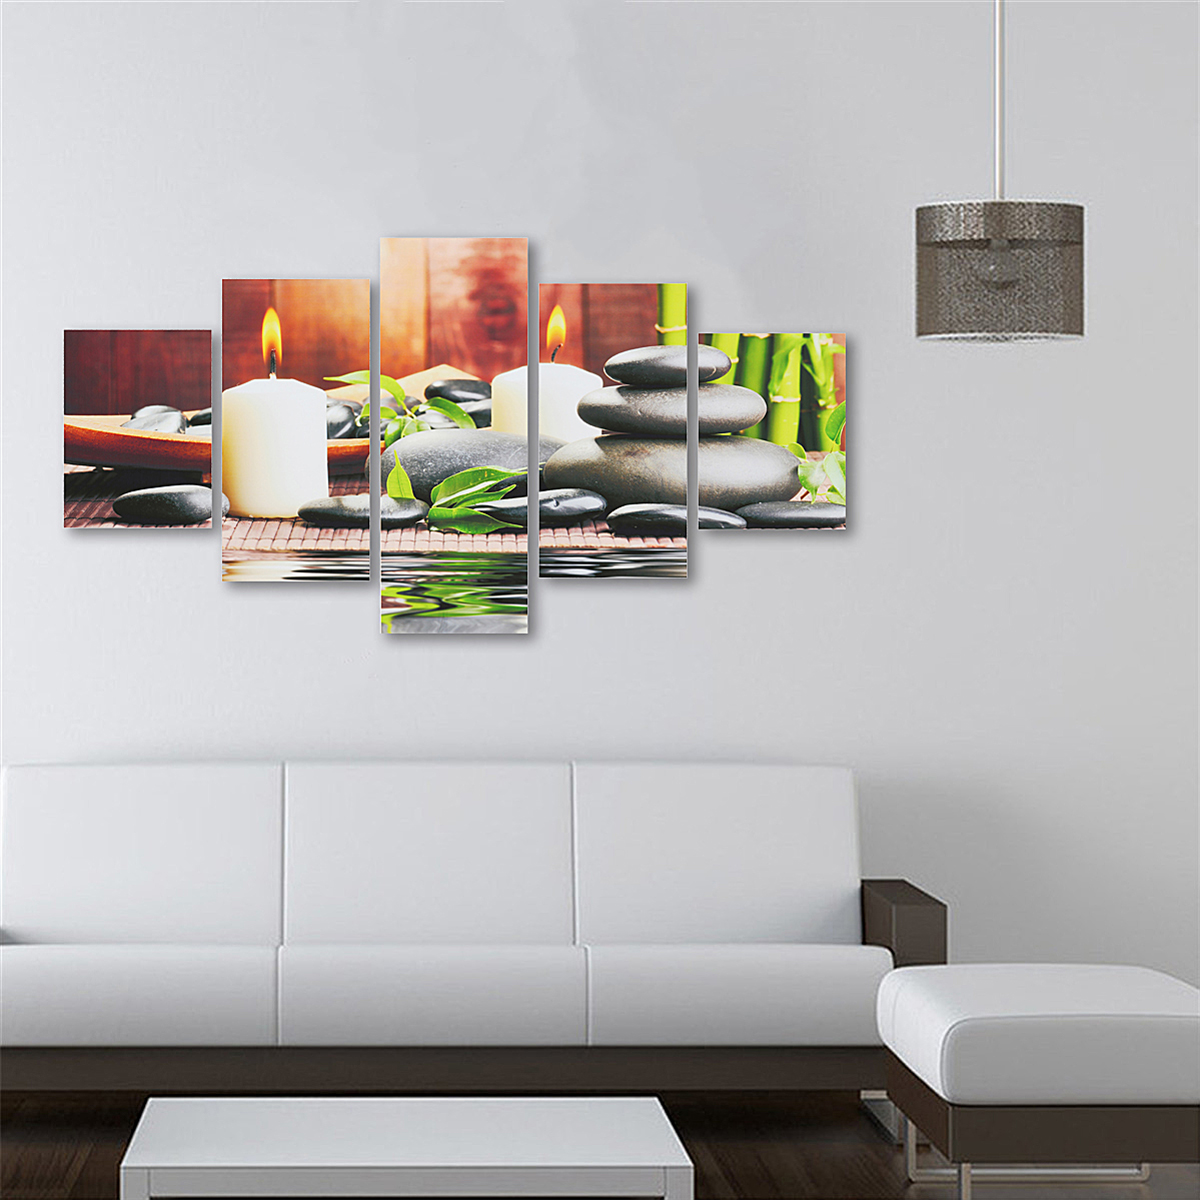 5Pcs-Canvas-Painting-Candle-Scenery-Picture-Wall-Decorative-Print-Art-Pictures-Frameless-Wall-Hangin-1803082-2